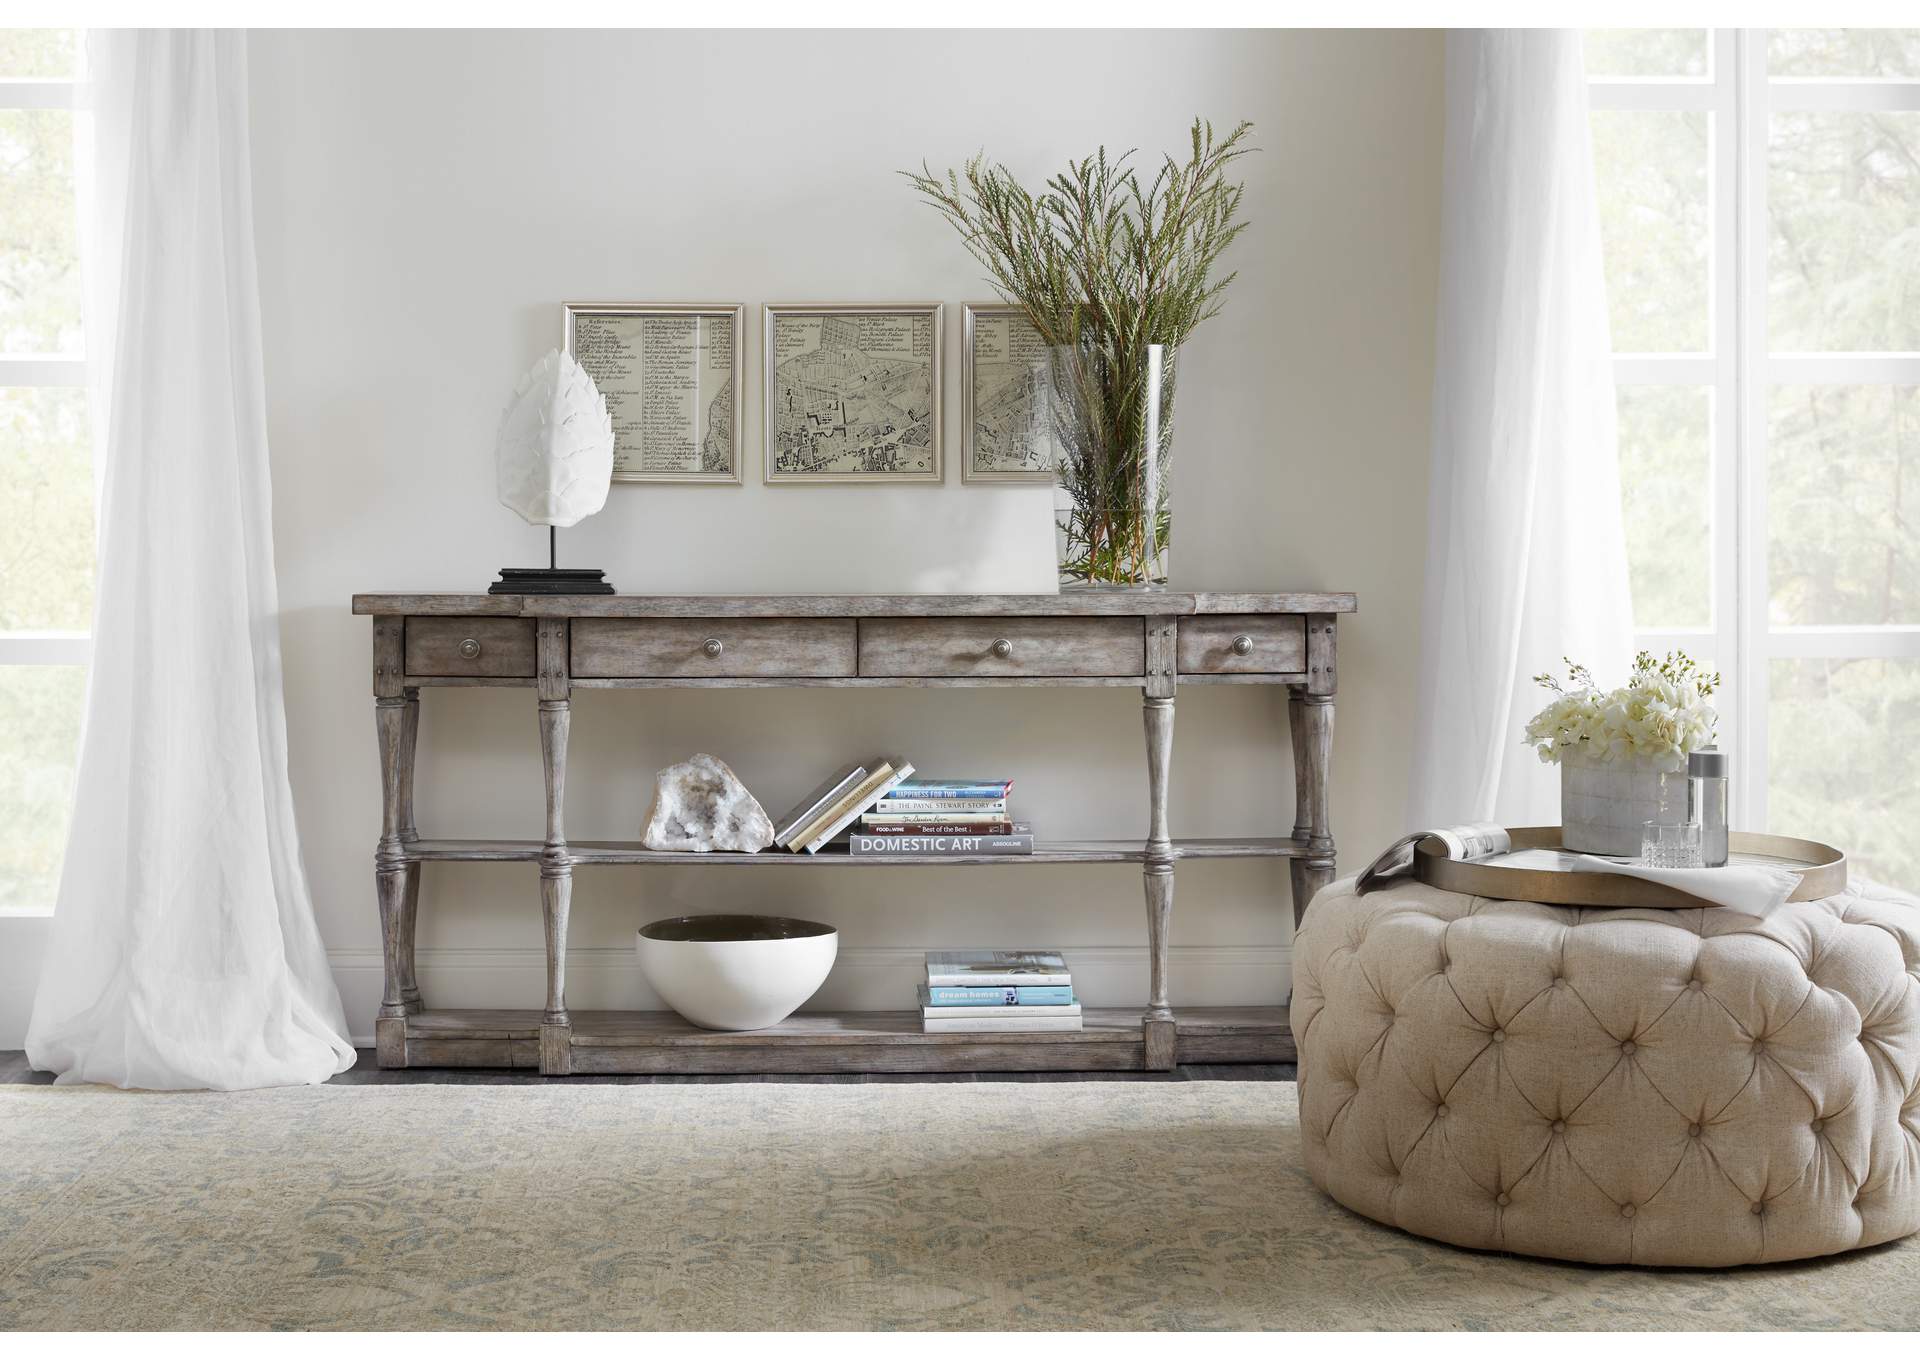 Sanctuary Four-Drawer Console,Hooker Furniture